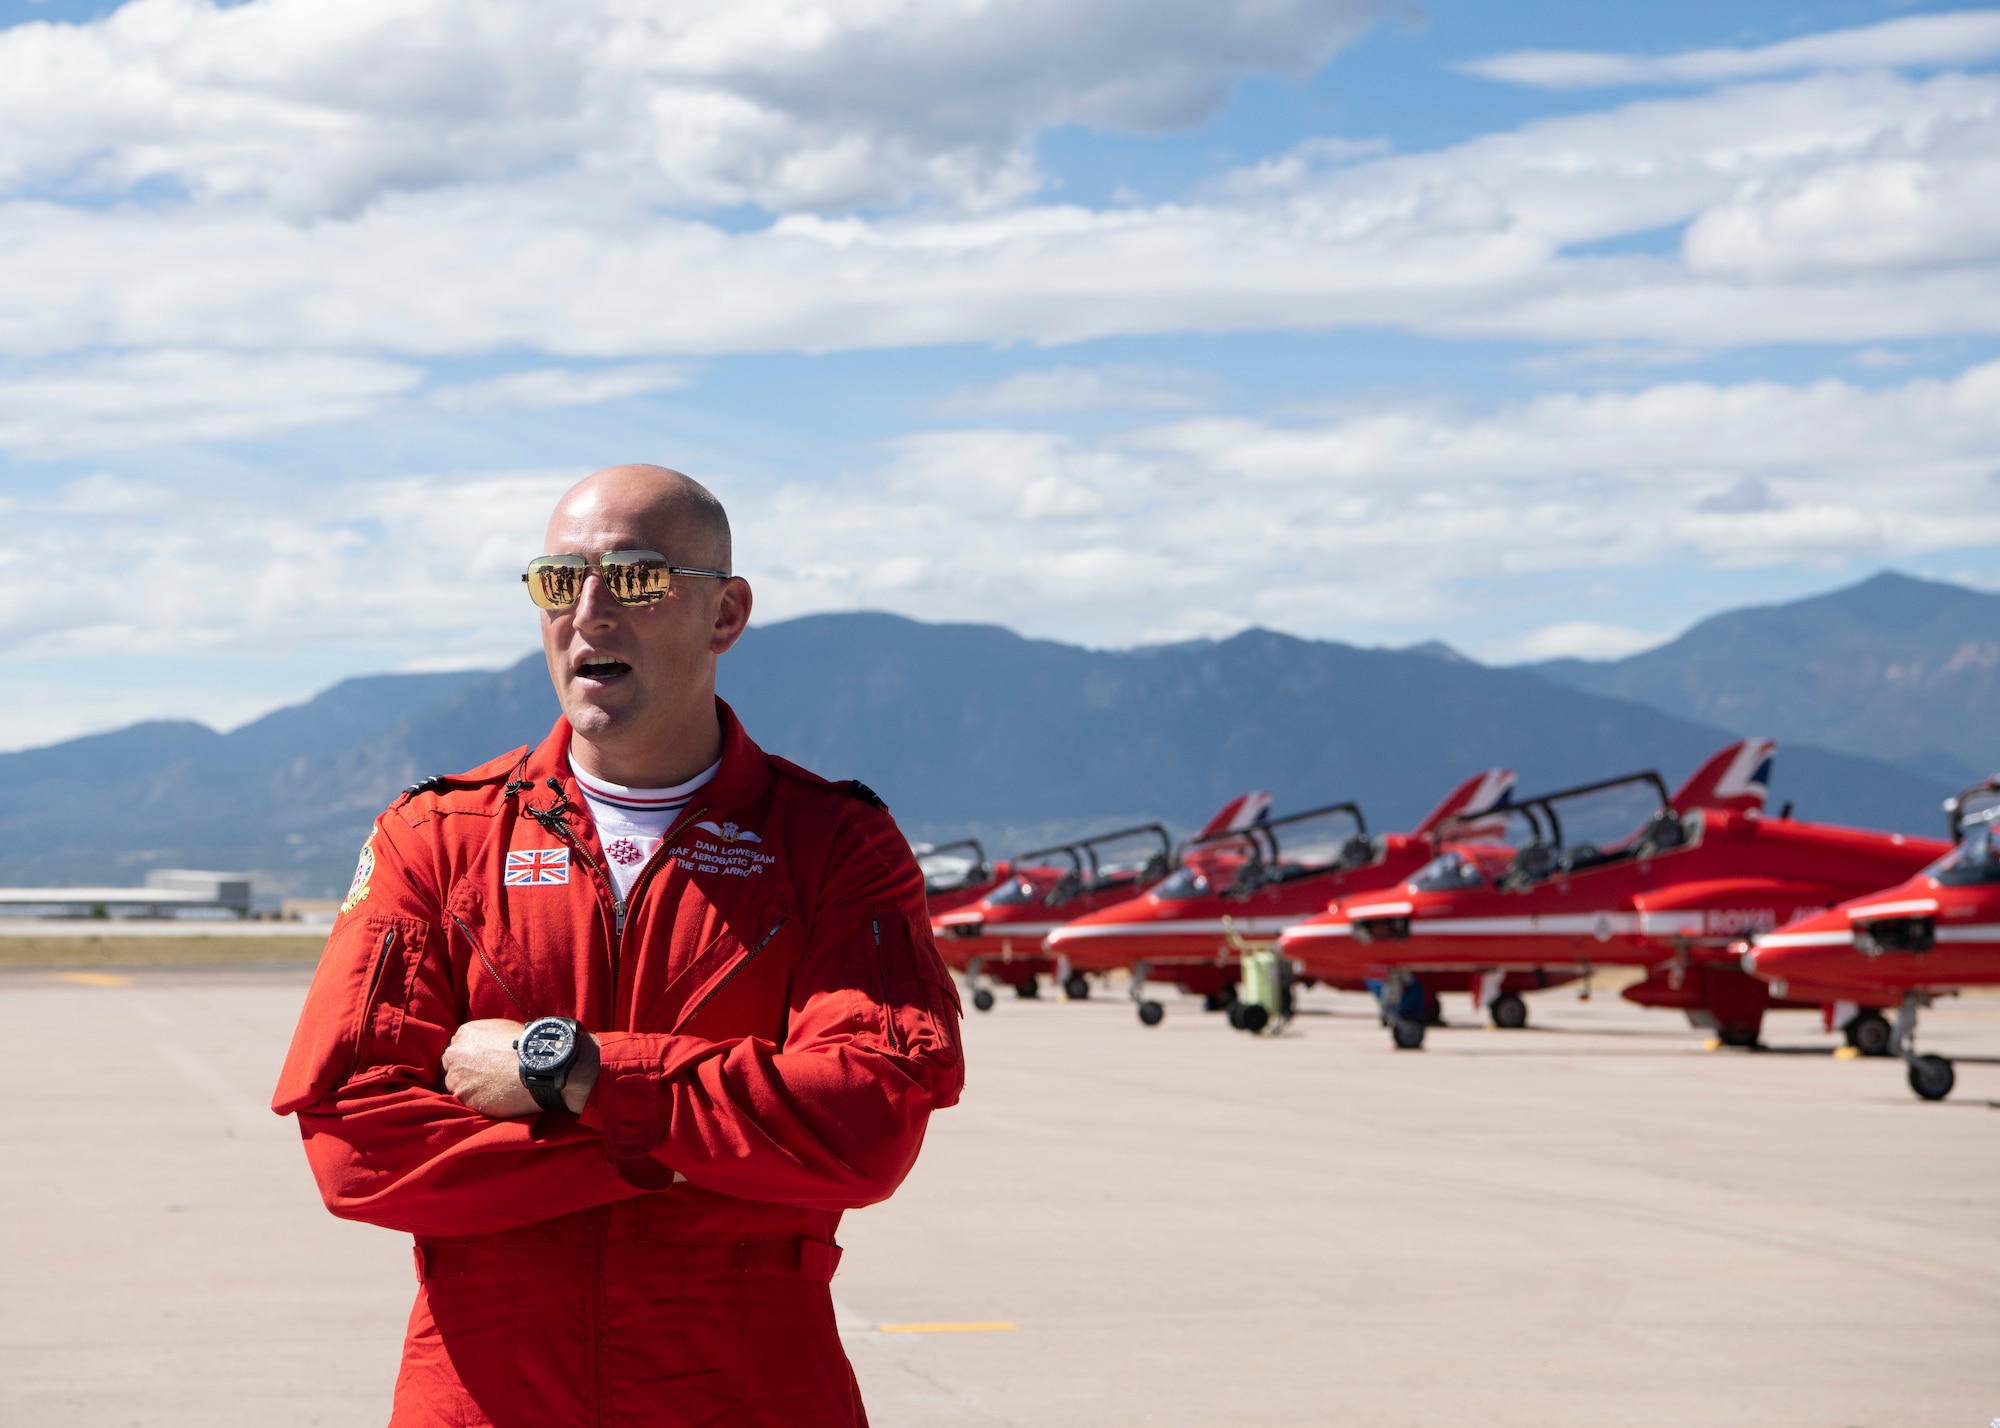 Flight Lieutenant Dan Lowes, member of the Royal Air Force demonstration team the Red Arrows, speaks to members of Colorado Springs media outlets Sept. 16, 2019 at Peterson Air Force Base, Colorado. Lowes was visiting the base as part of the Red Arrows 2019 North American tour. (U.S. Air Force photo by Heather Heiney)